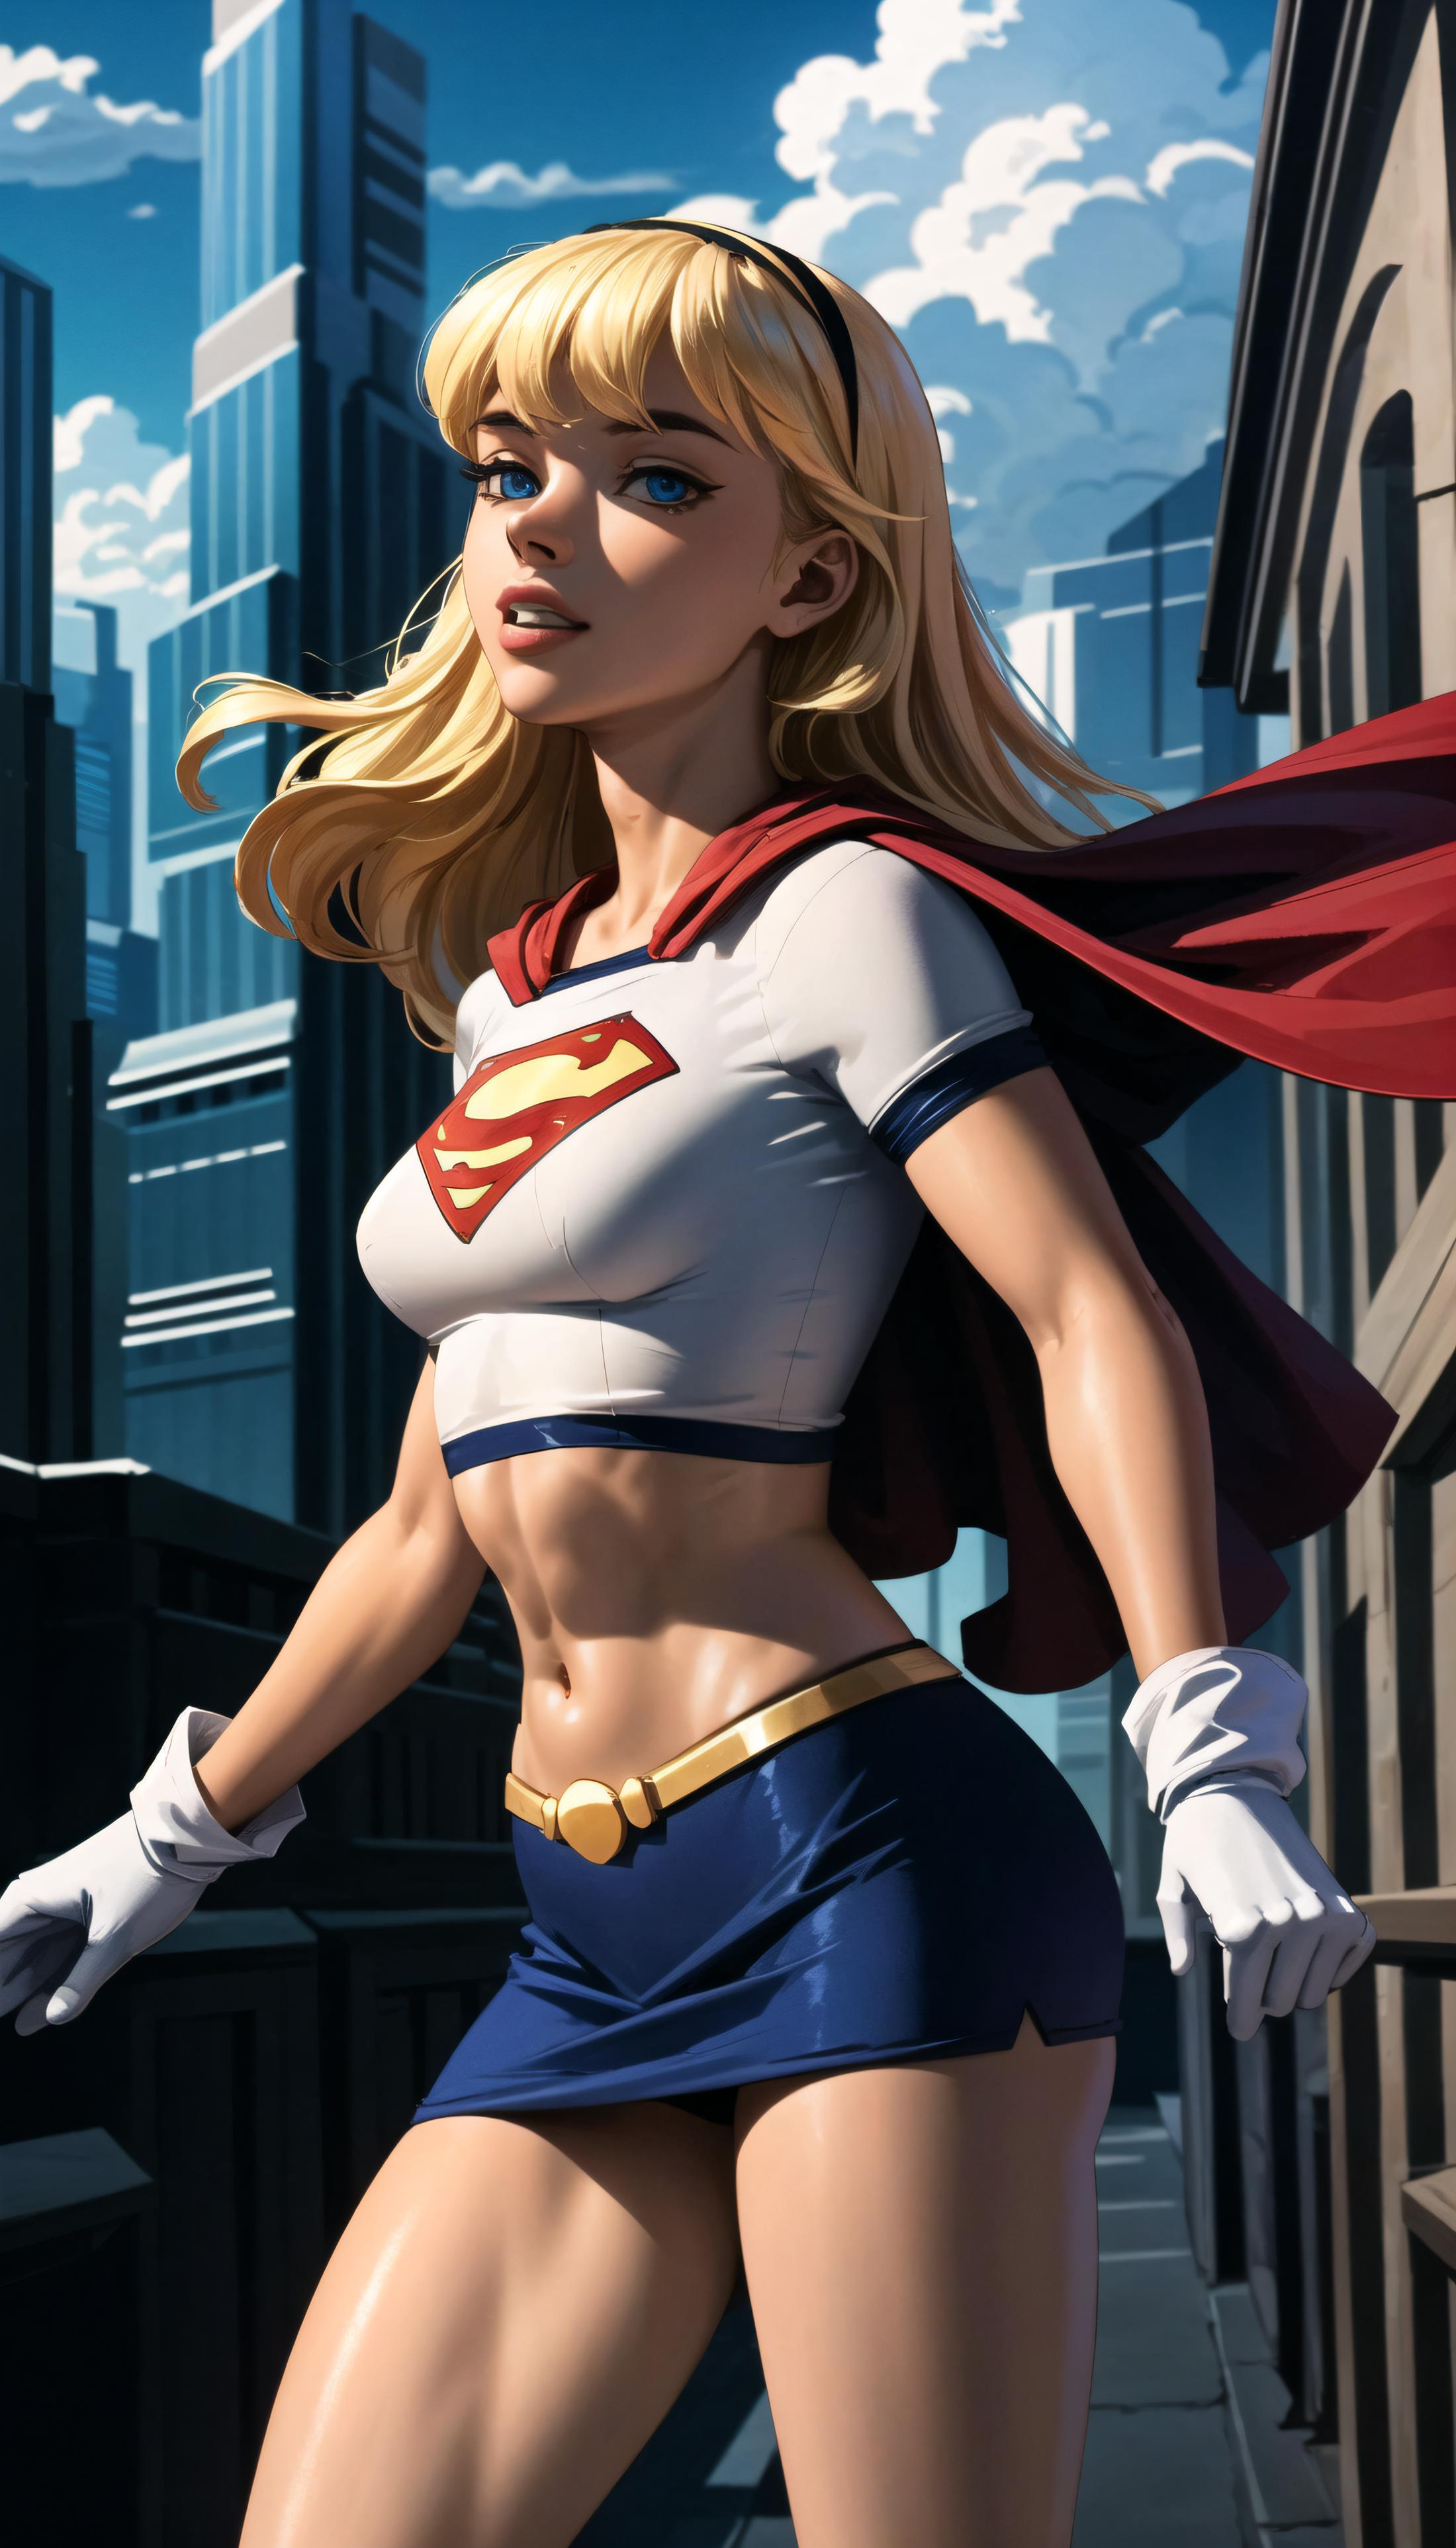 A superheroine in a white and blue costume stands in the city.